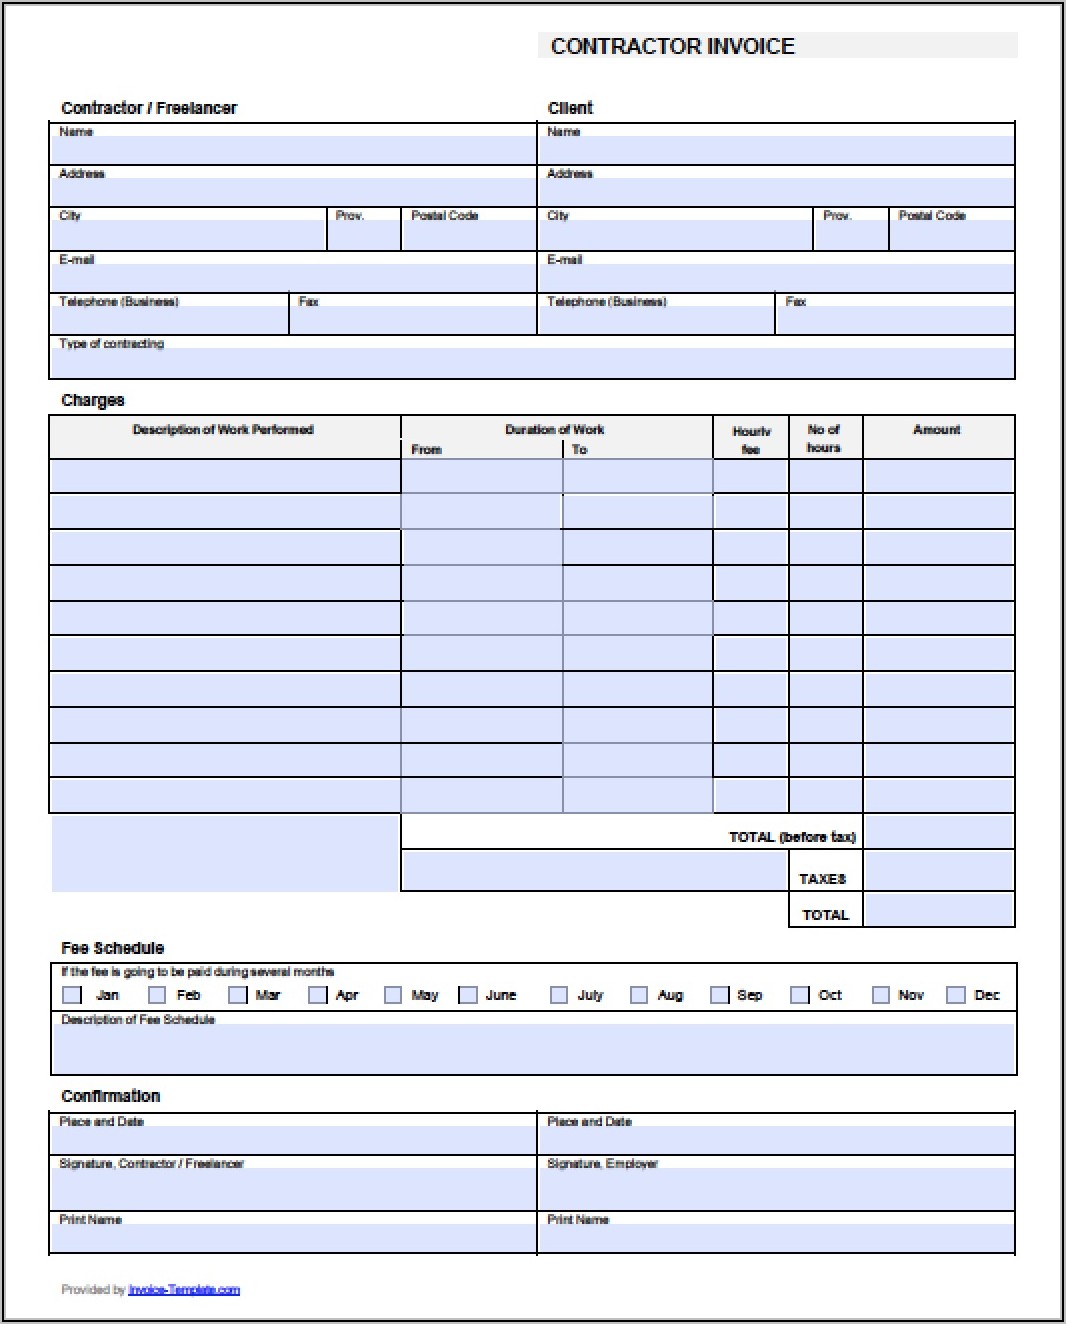 Contractor Invoice Template Word